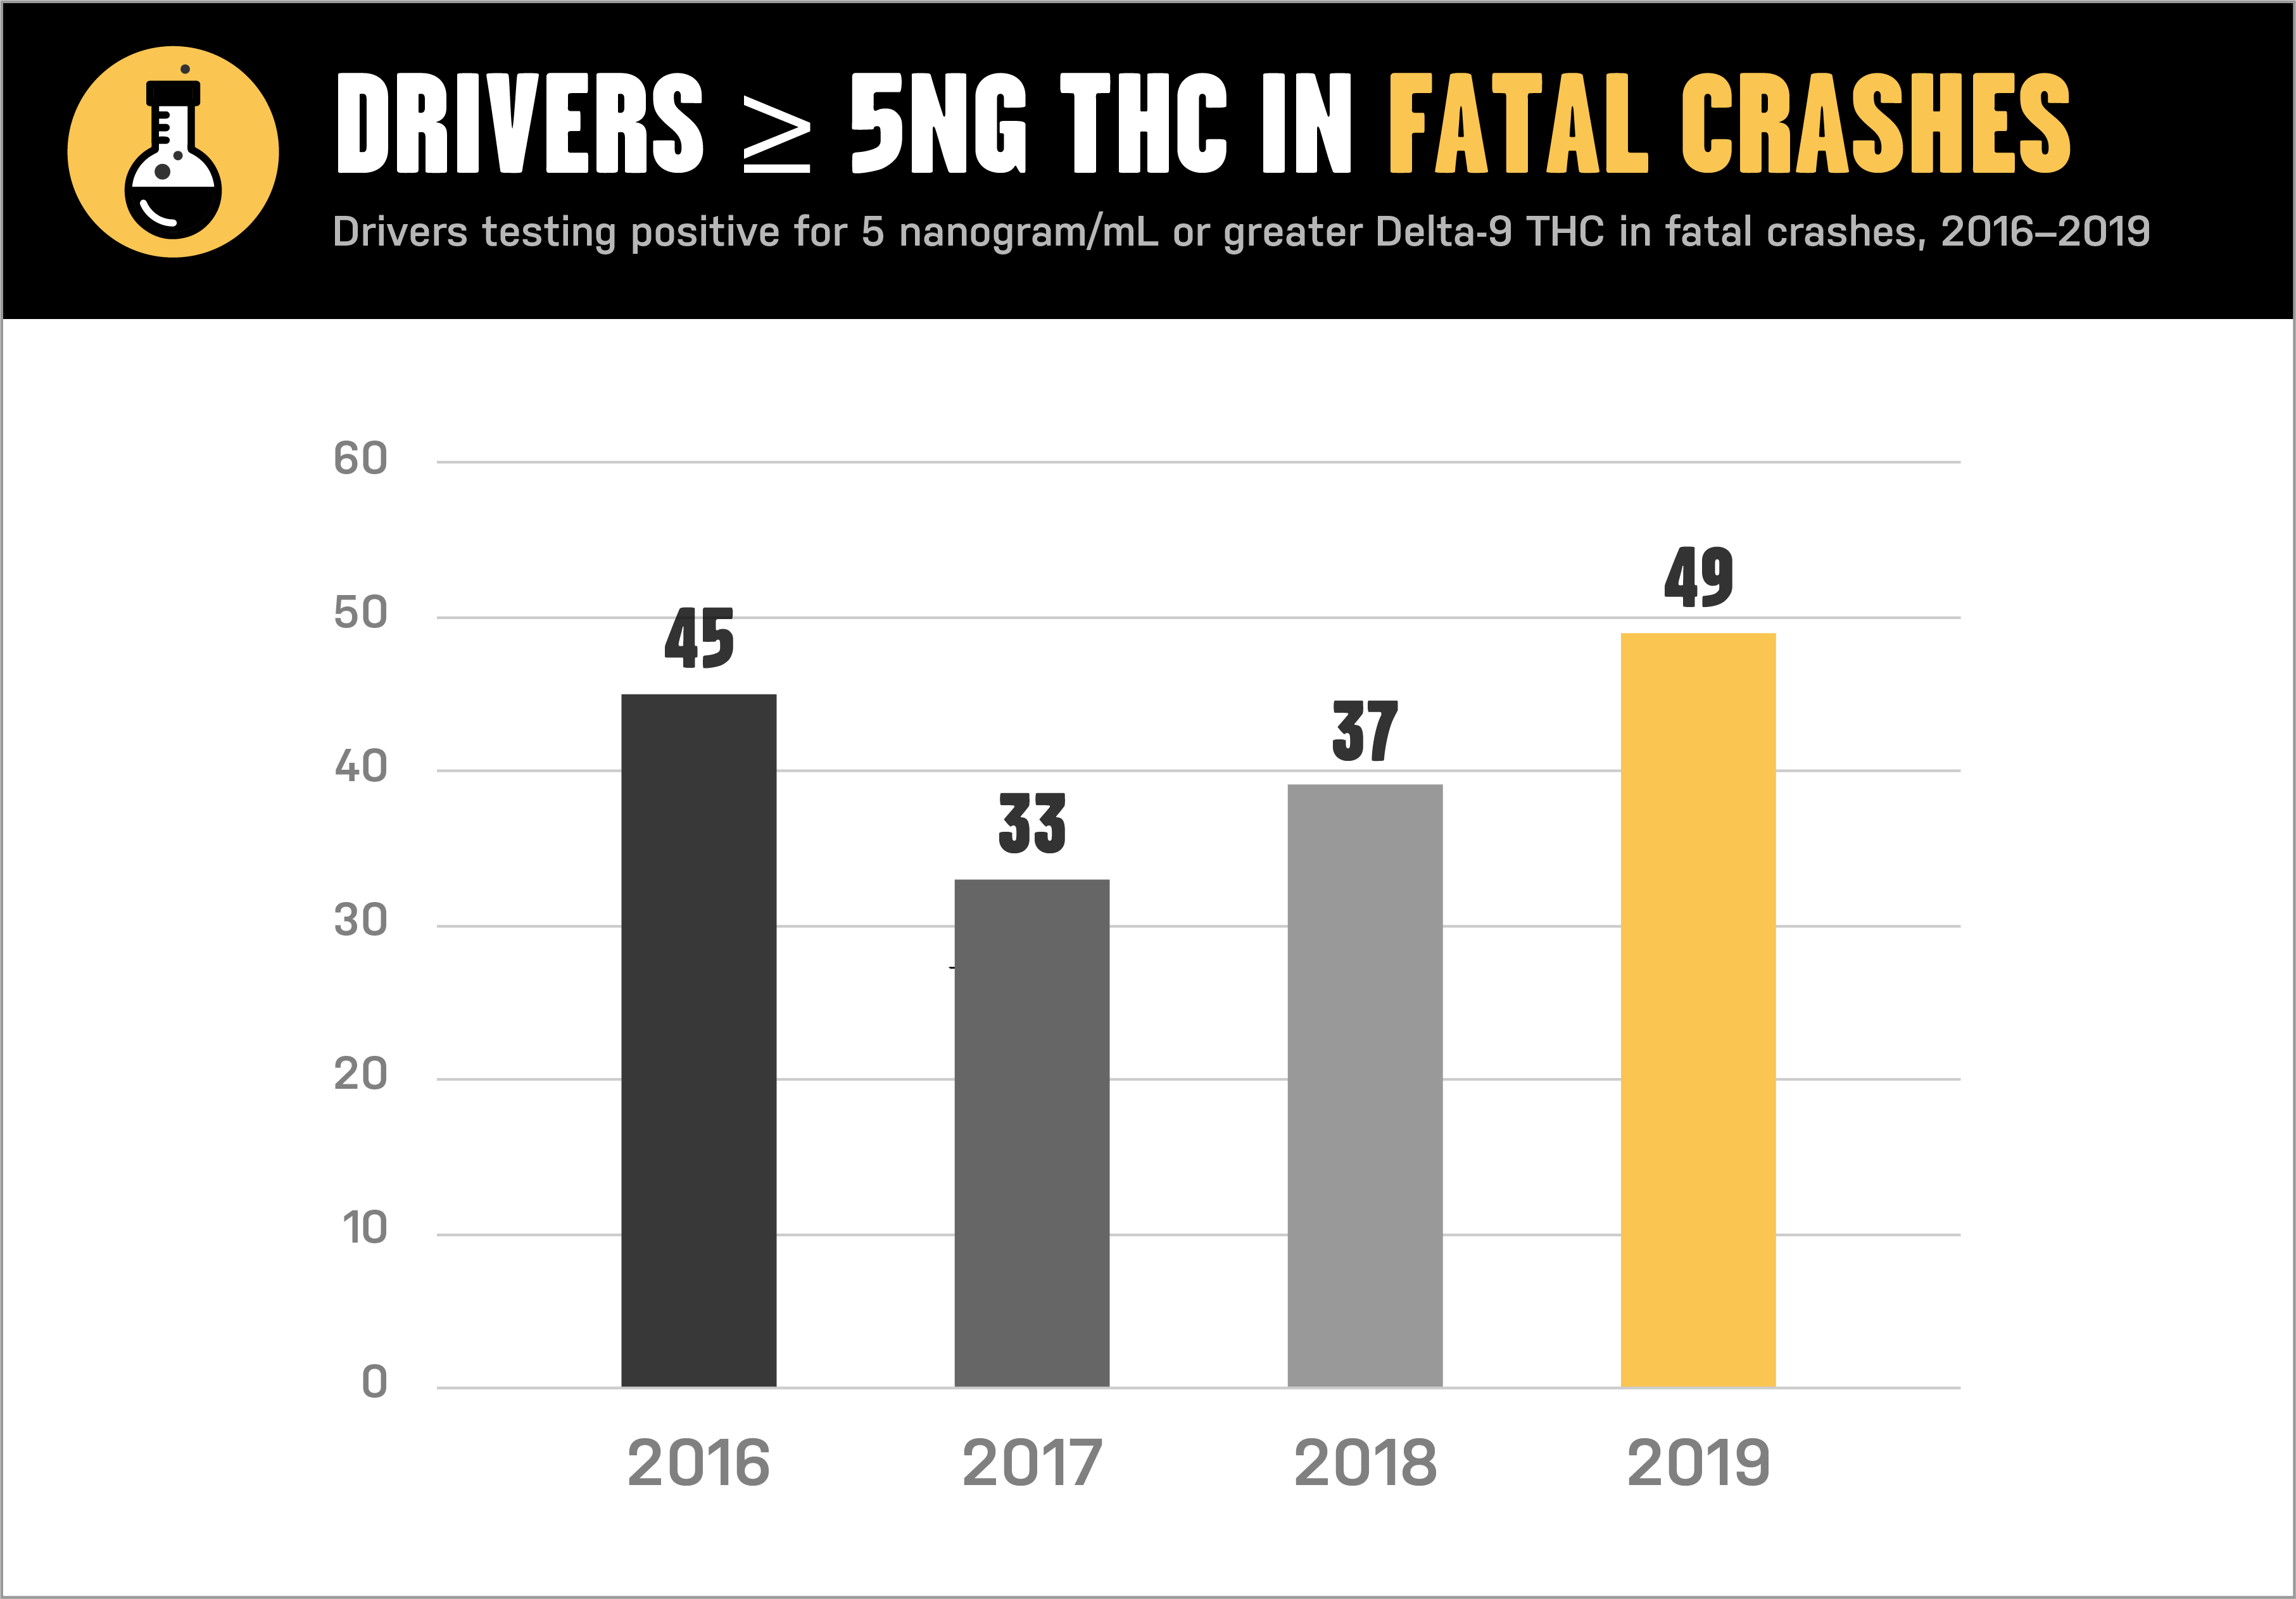 Drivers testing positive for 5 nanogram/mL or grater Delta-9 THC in fatal crashes from 2016 to 2019 detail image